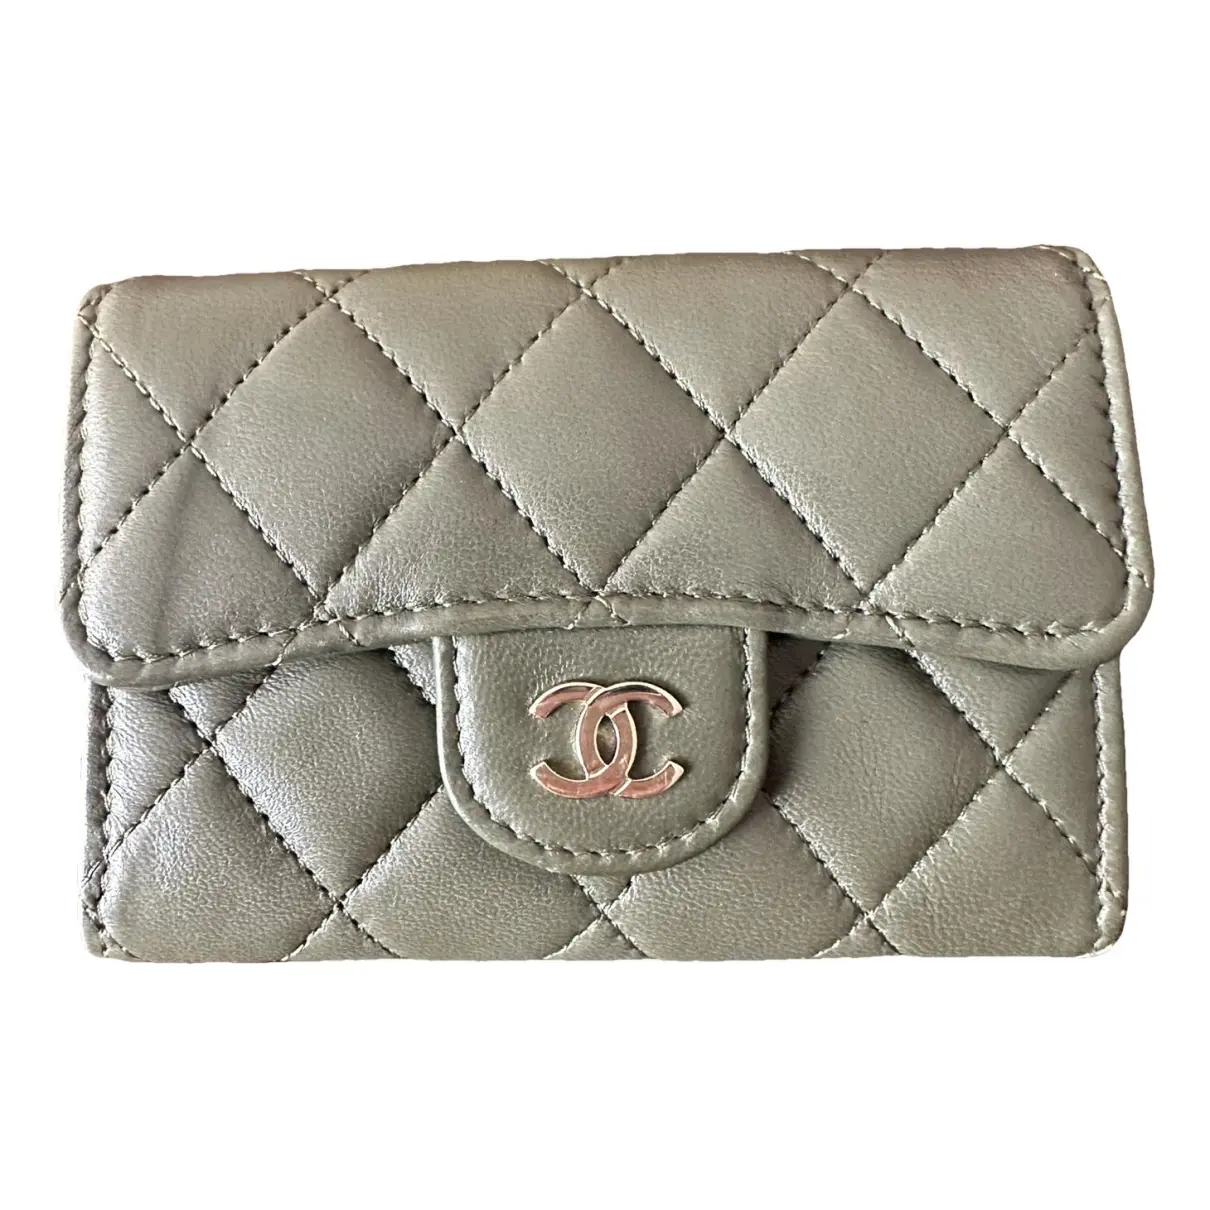 Timeless/classique leather wallet Chanel Grey in Leather - 36808716